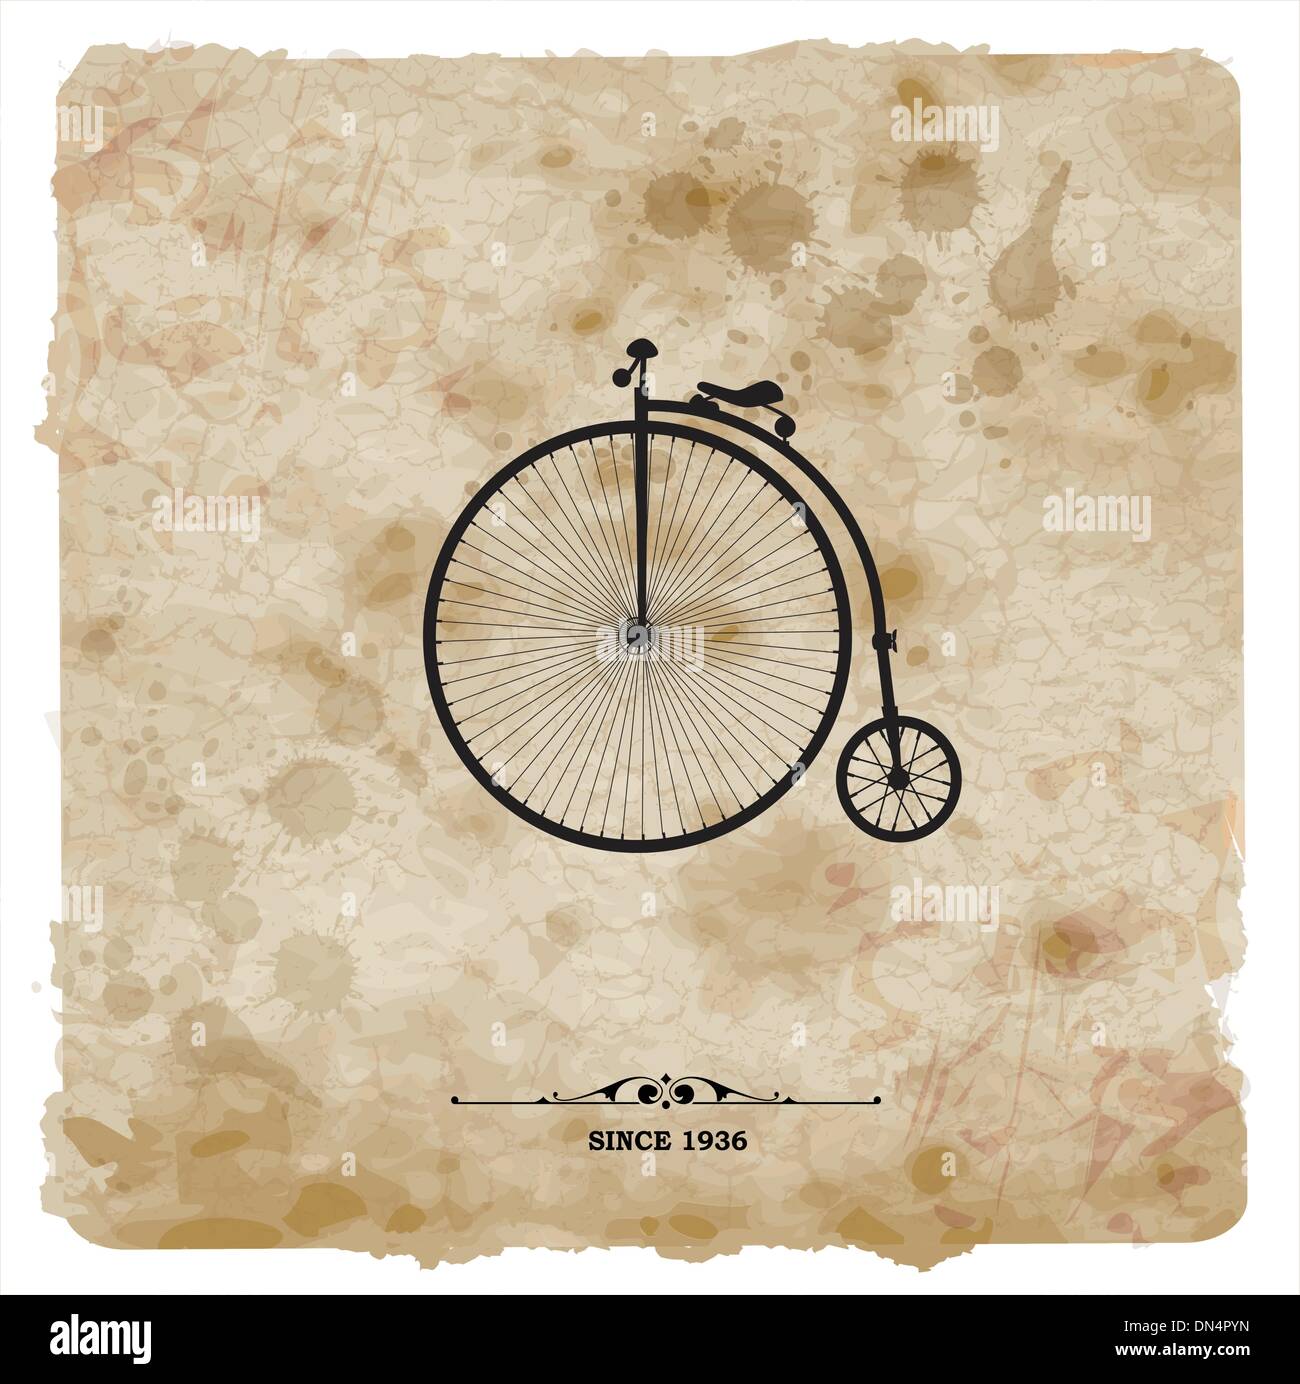 Vintage postcard. Retro bicycle on Grunge Background Stock Vector